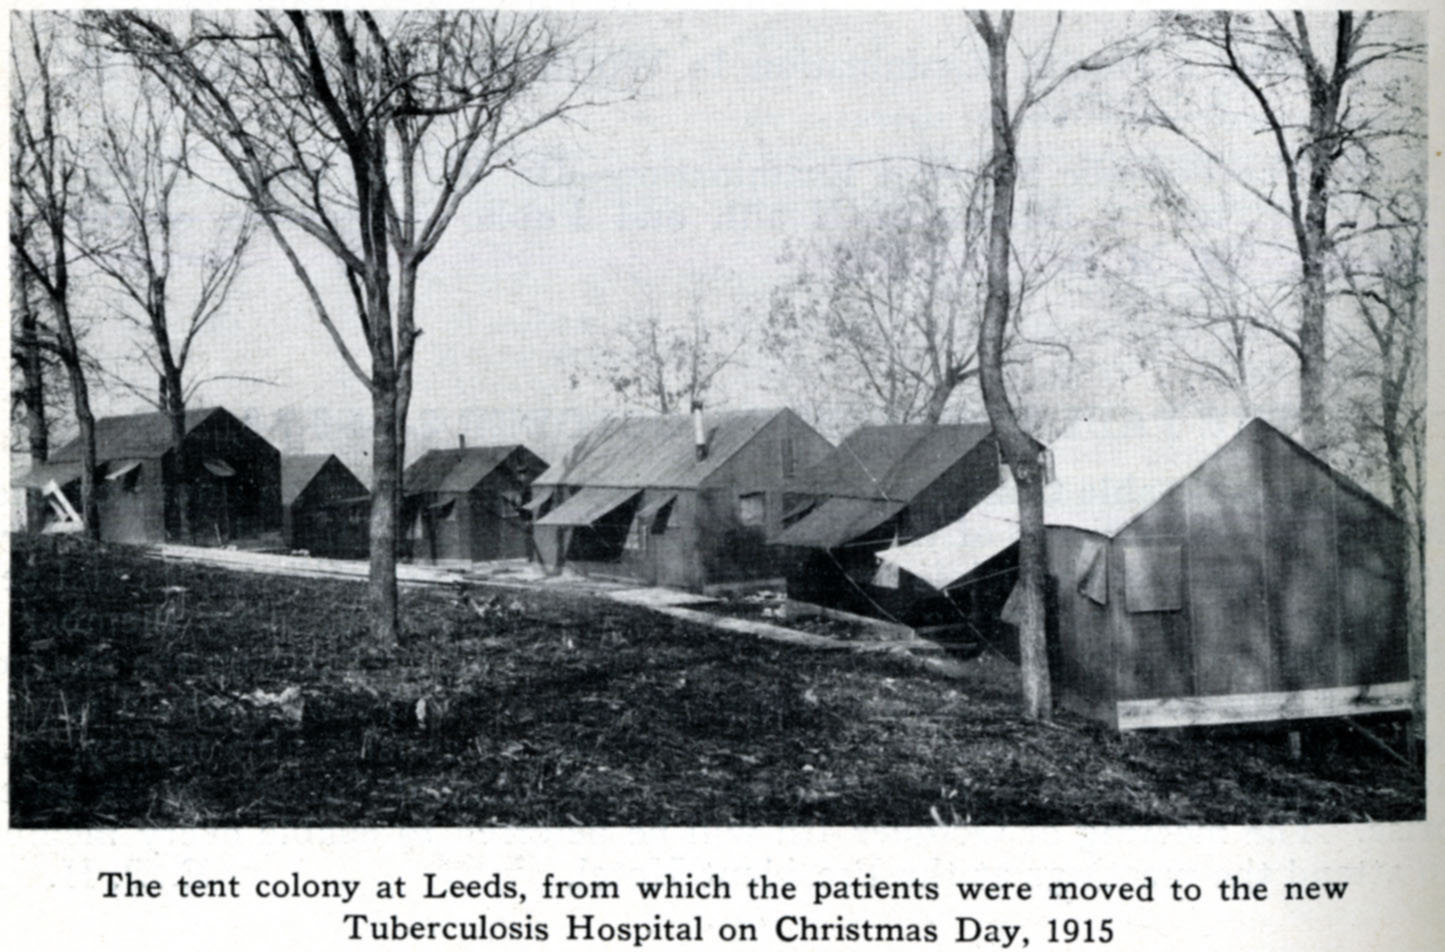 Circa 1915 view of the TB tent colony from the September 24, 1932, issue of the Jackson County Medical Journal.